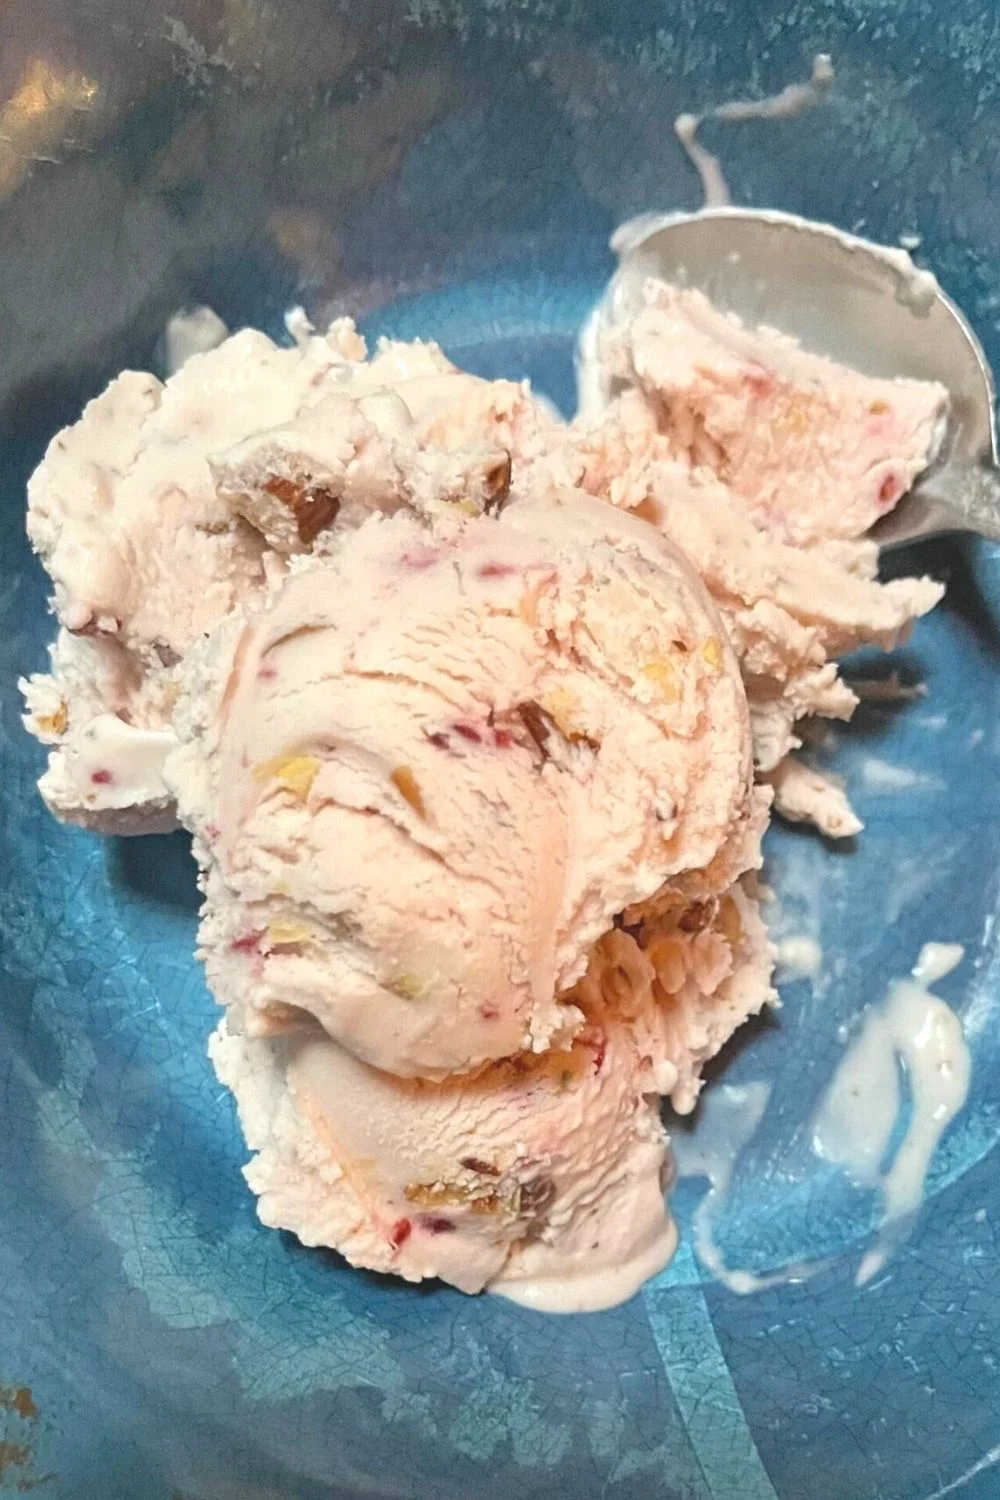 Two scoops of ice cream in a blue bowl.